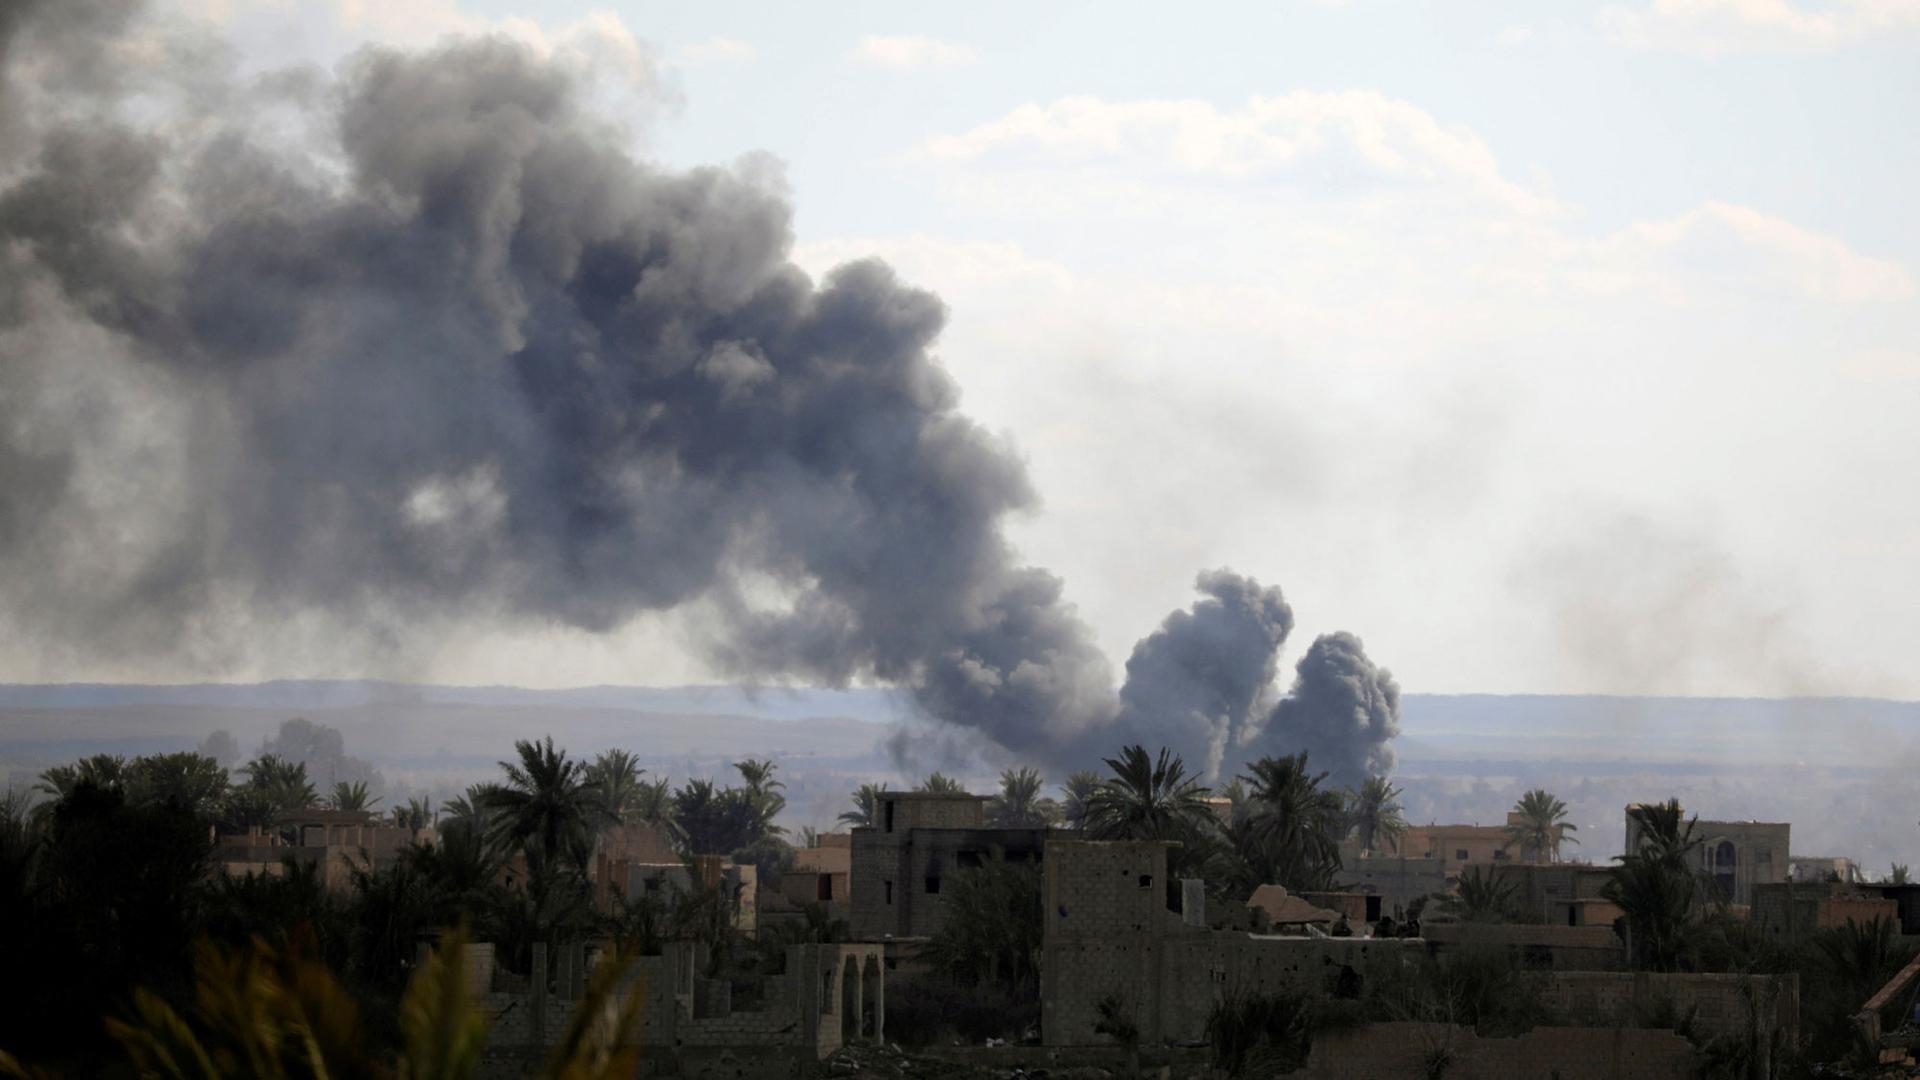 Black plumes of smoke are shown rising up and to the left of the photo with bombed out buildings below in Baghouz, Syria.